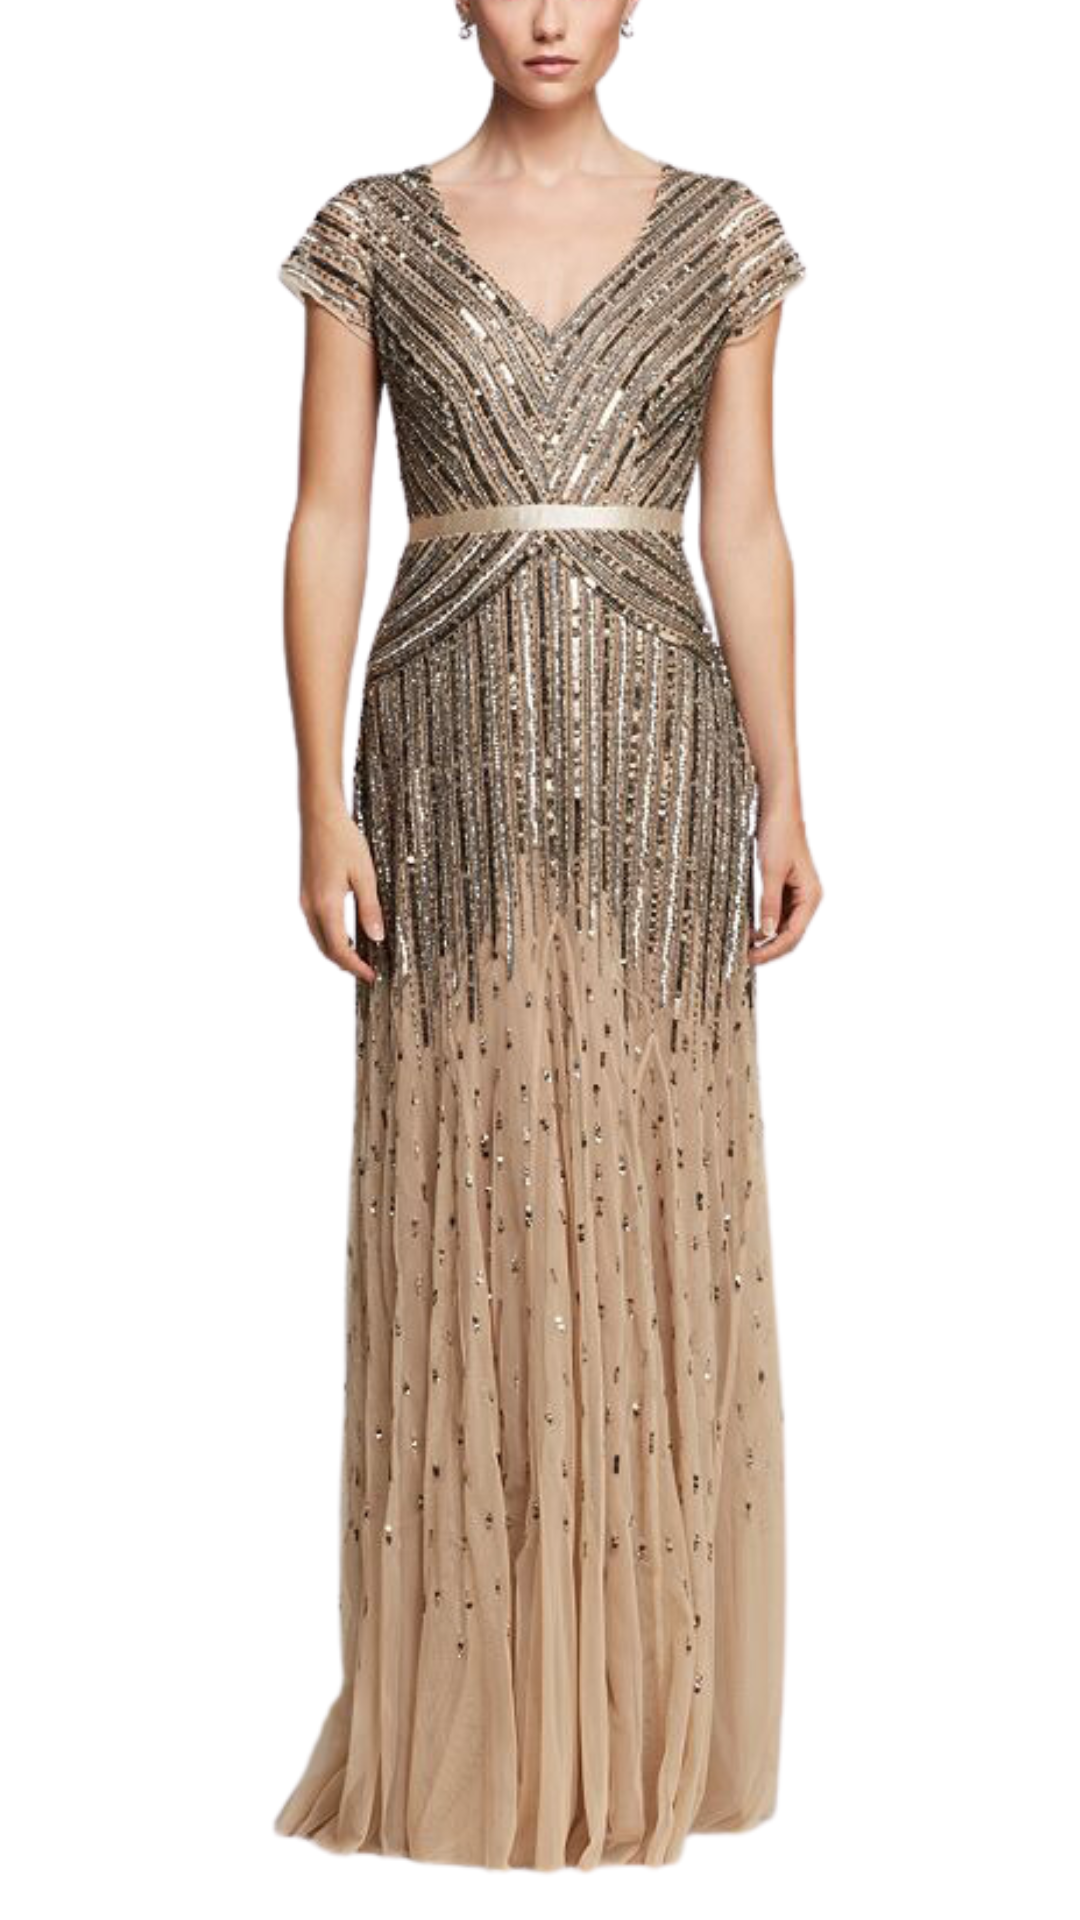 Adrianna Papell Beaded Cap Sleeved Gown in Nude